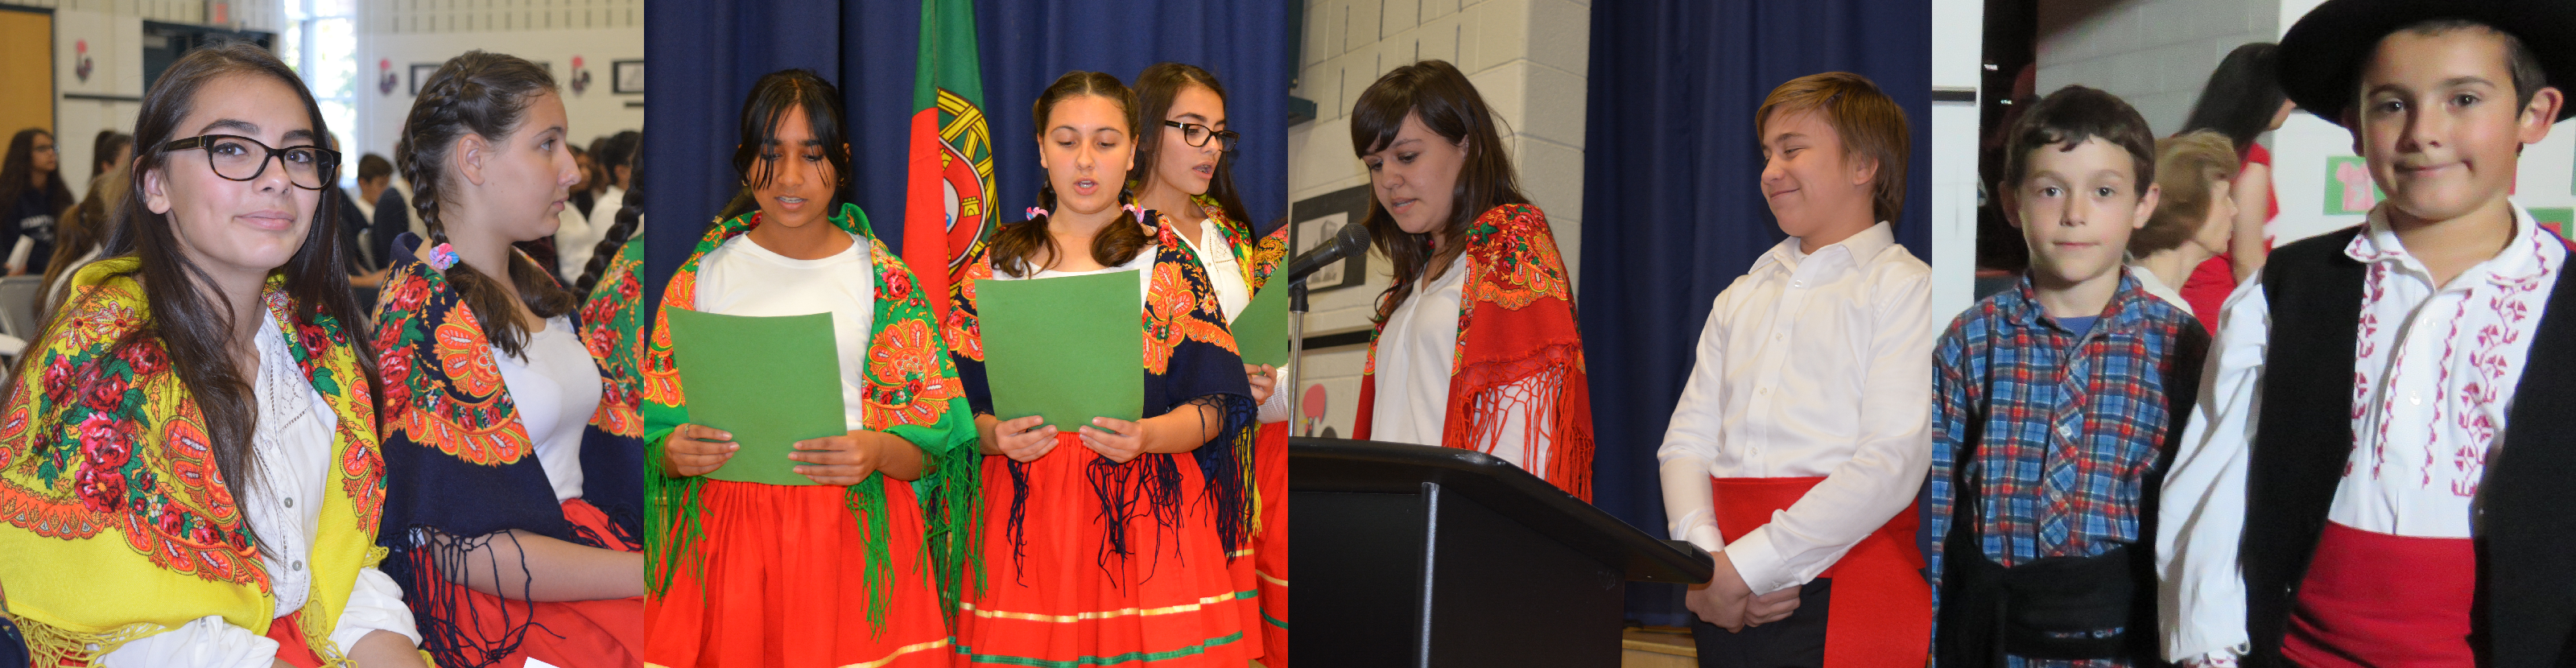 Four photos of students dressed in traditional Portuguese clothing to perform at an event celebrating Portuguese Canadian Heritage.